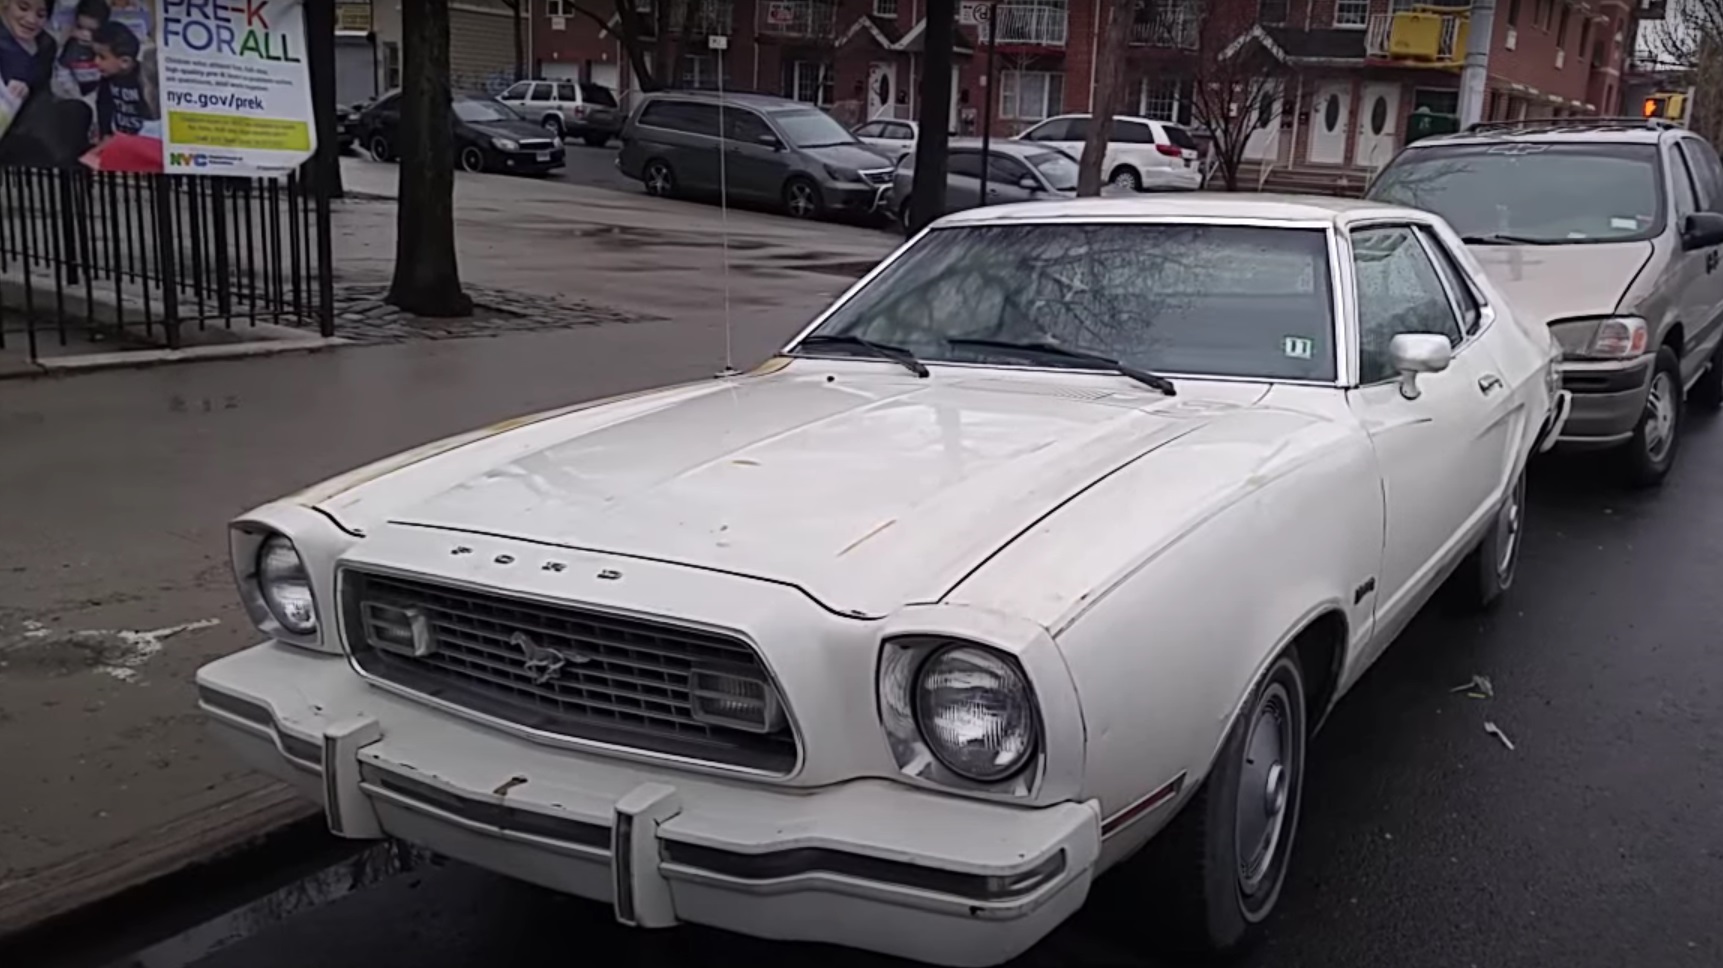 Video: 1974 Ford Mustang Ghia Quick Walkaround